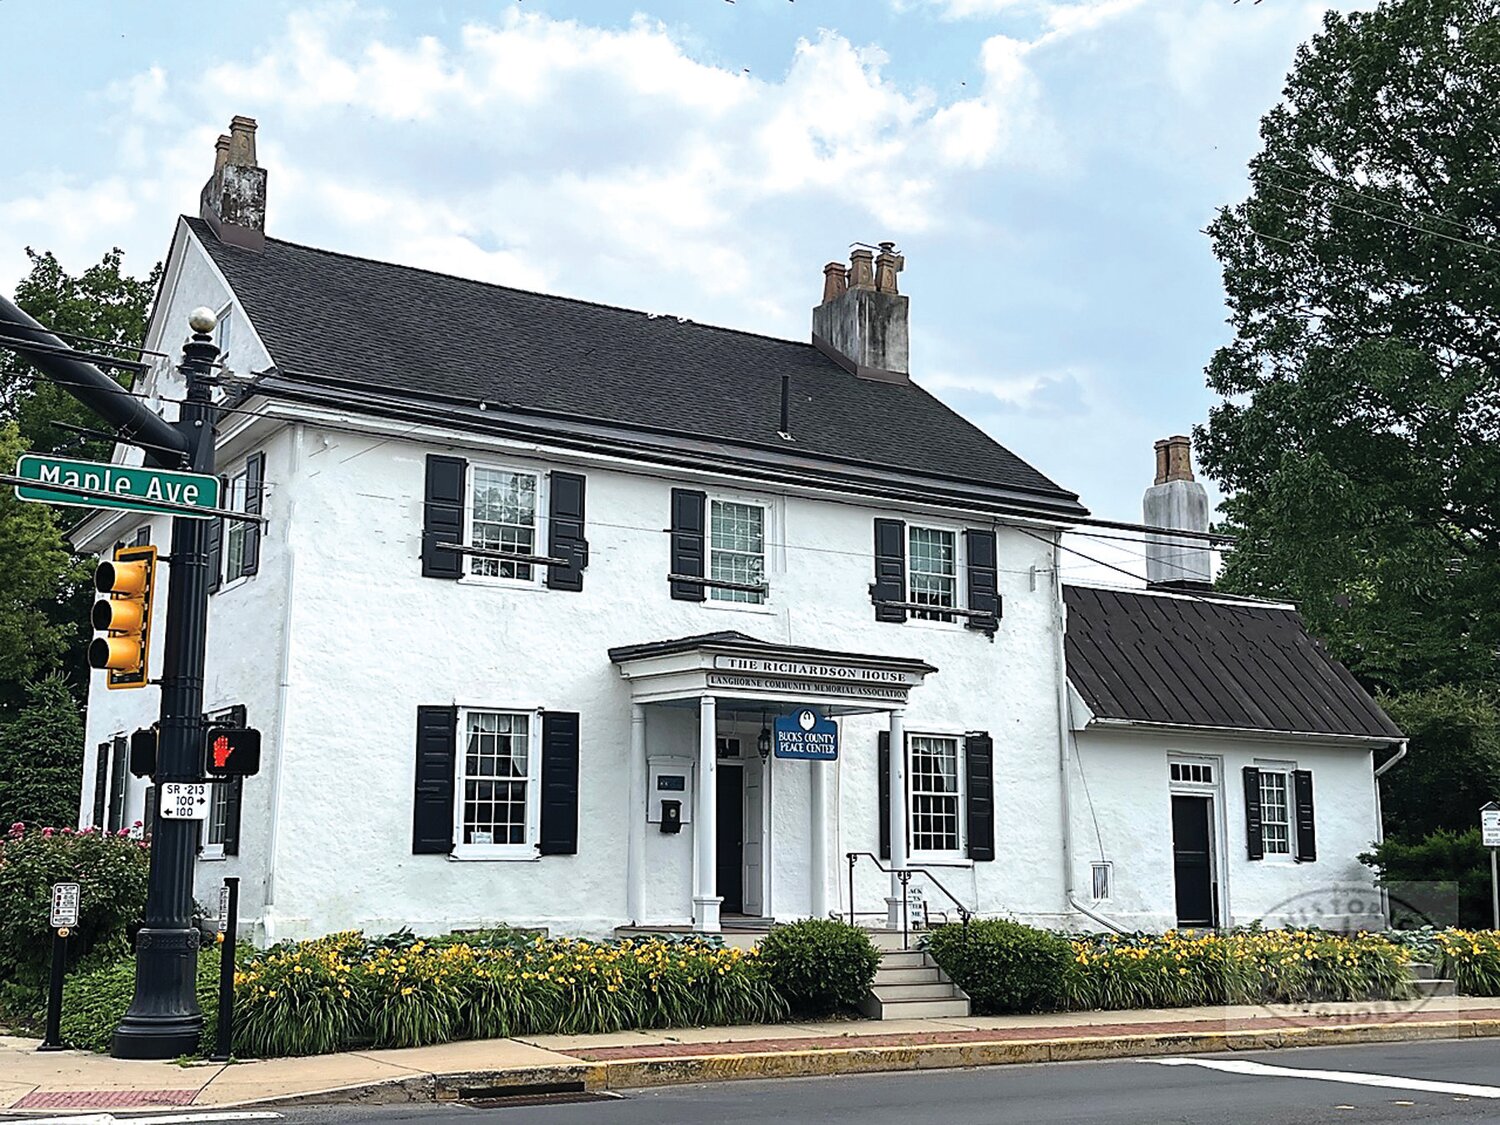 Today the Joseph Richardson House in Langhorne serves as home for the Peace Center and the Four Lanes End Garden Club and a meeting place for local community organizations.